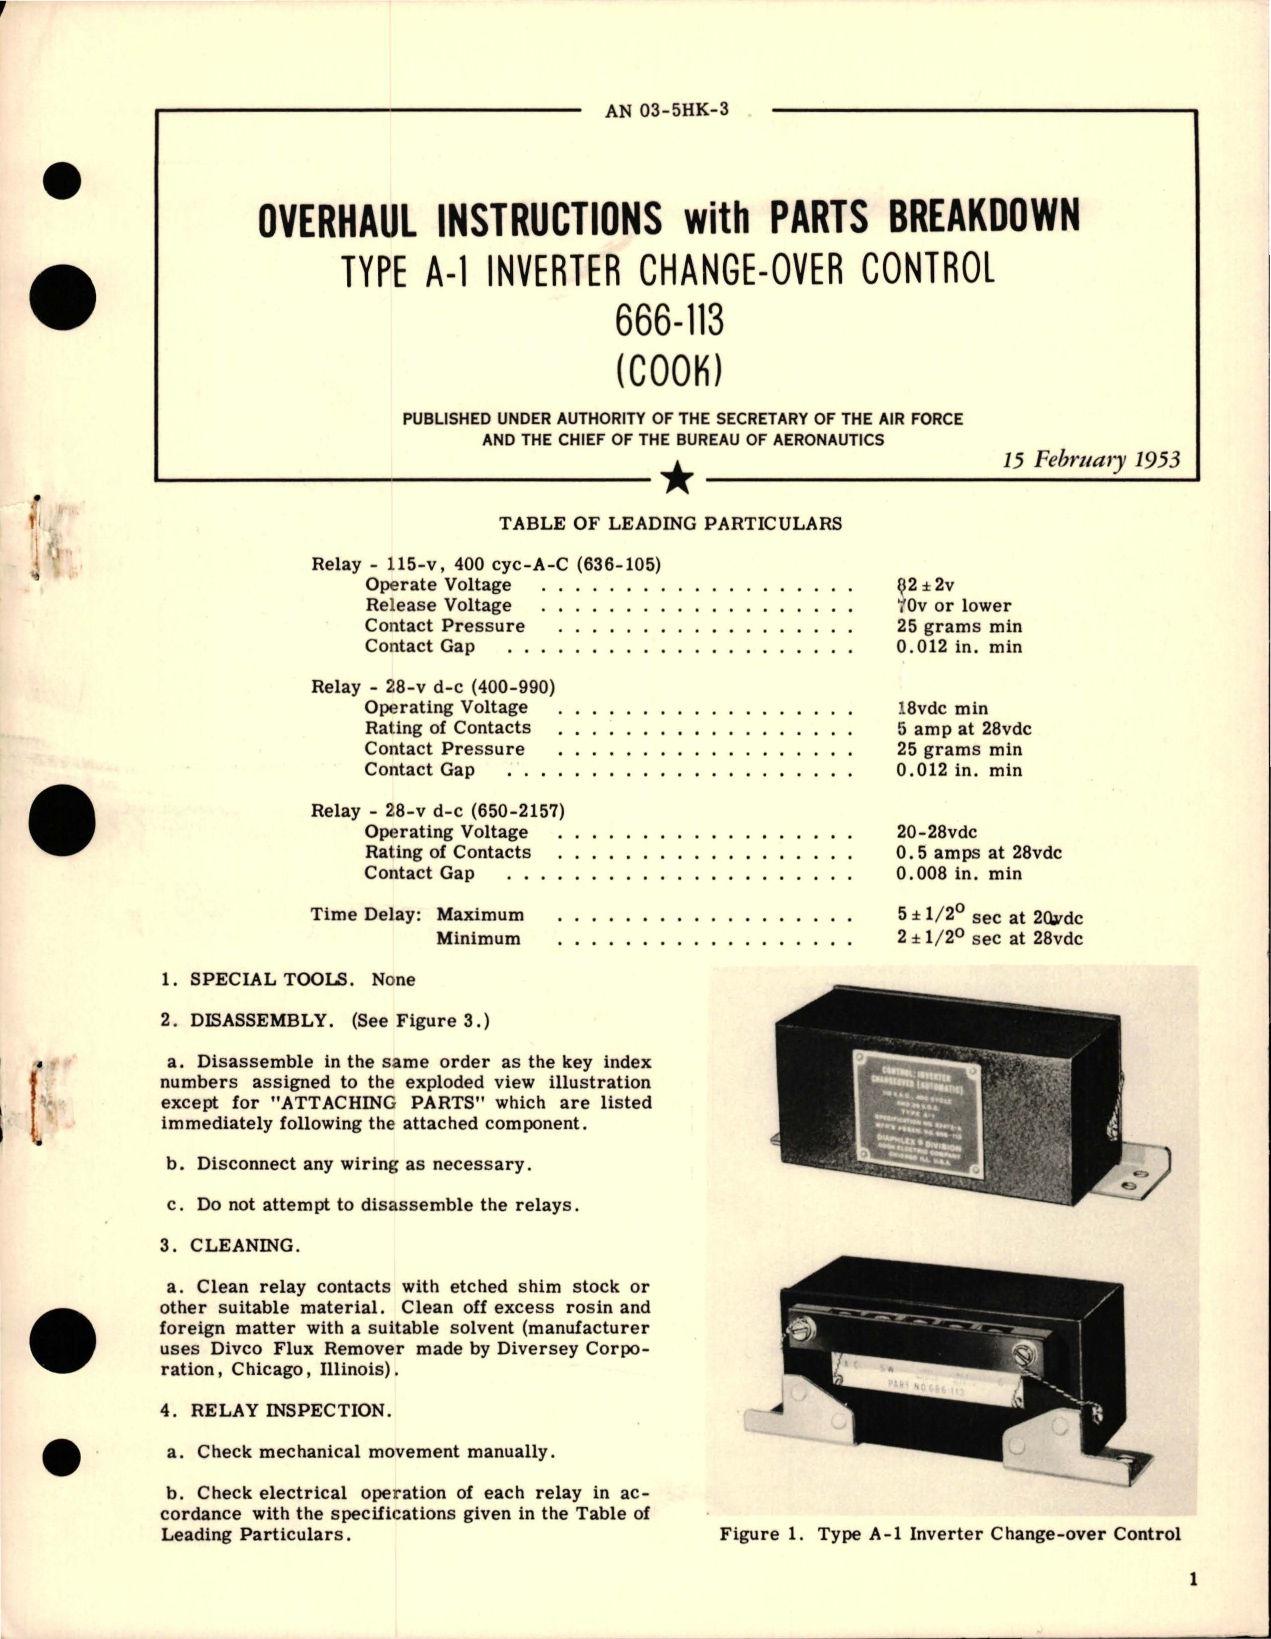 Sample page 1 from AirCorps Library document: Overhaul Instructions with Parts Breakdown for Inverter Change-Over Control - Type A-1 - 666-113